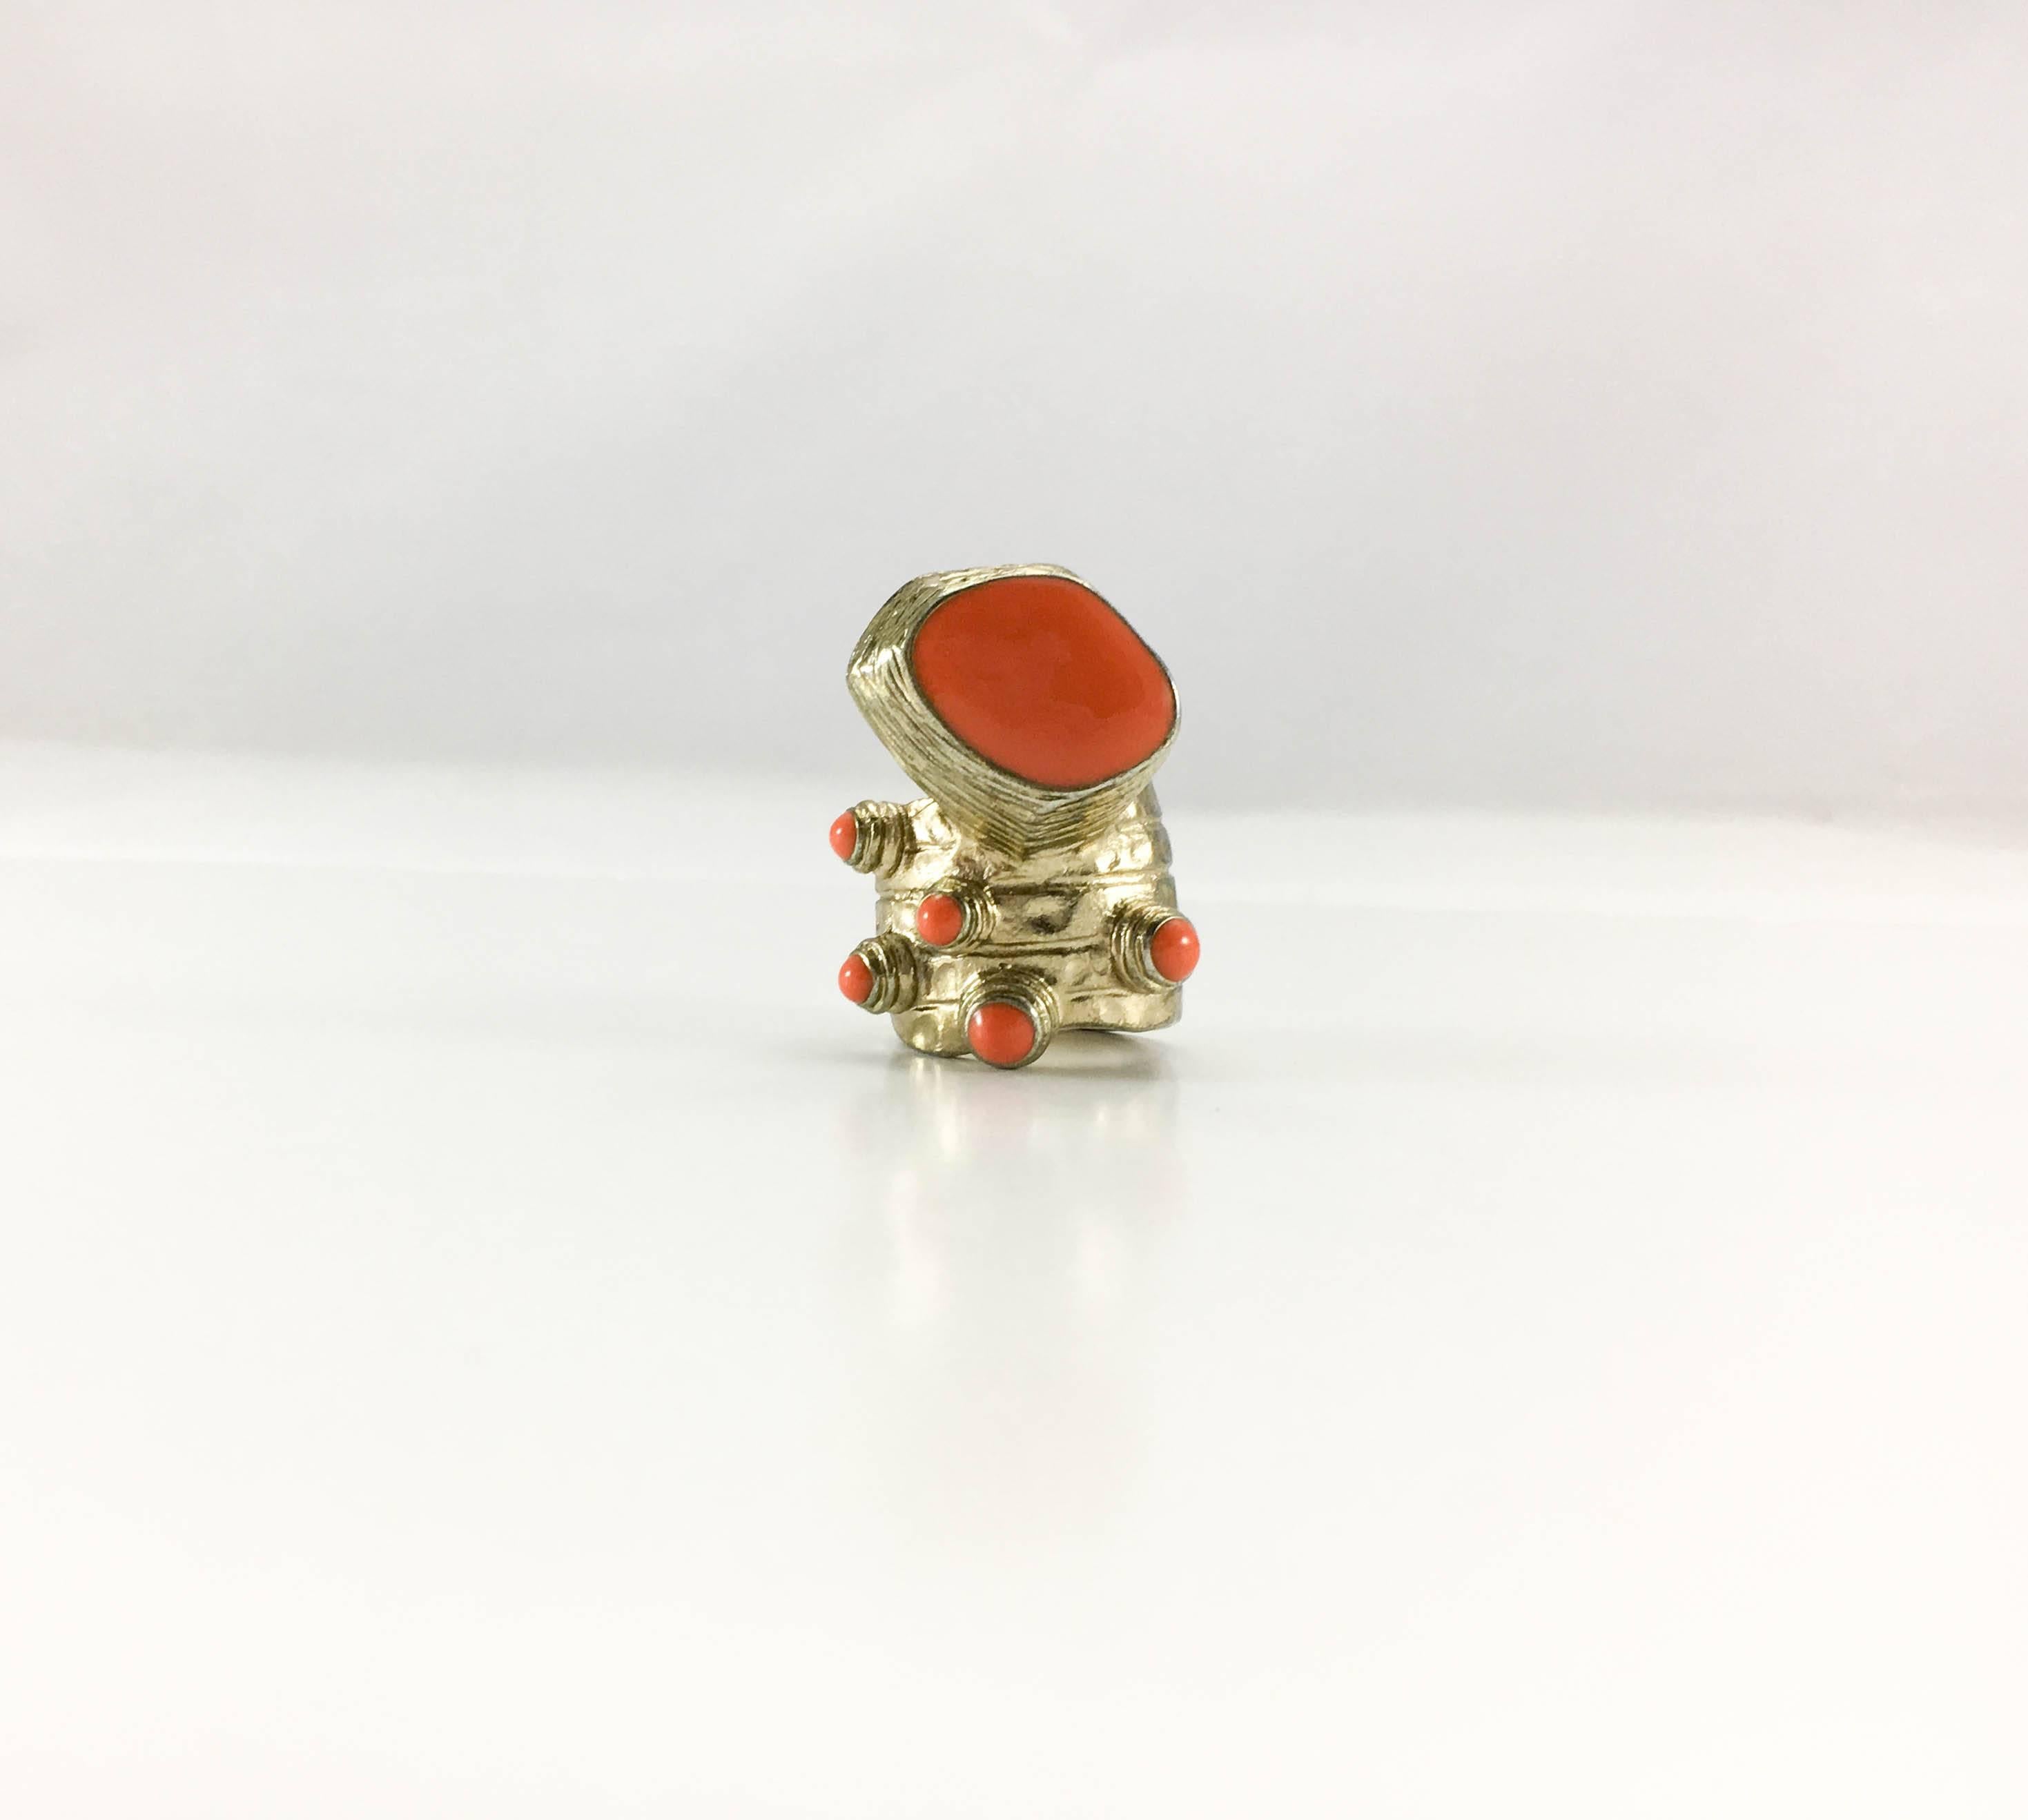 Vintage Yves Saint Laurent Chunky Modernist Ring. This striking ring by Yves Saint Laurent was created in the 1990’s. Of modernist design, it is made in gilt (light gilding) metal and features faux coral beads. Yves Saint Laurent signed. A bit of